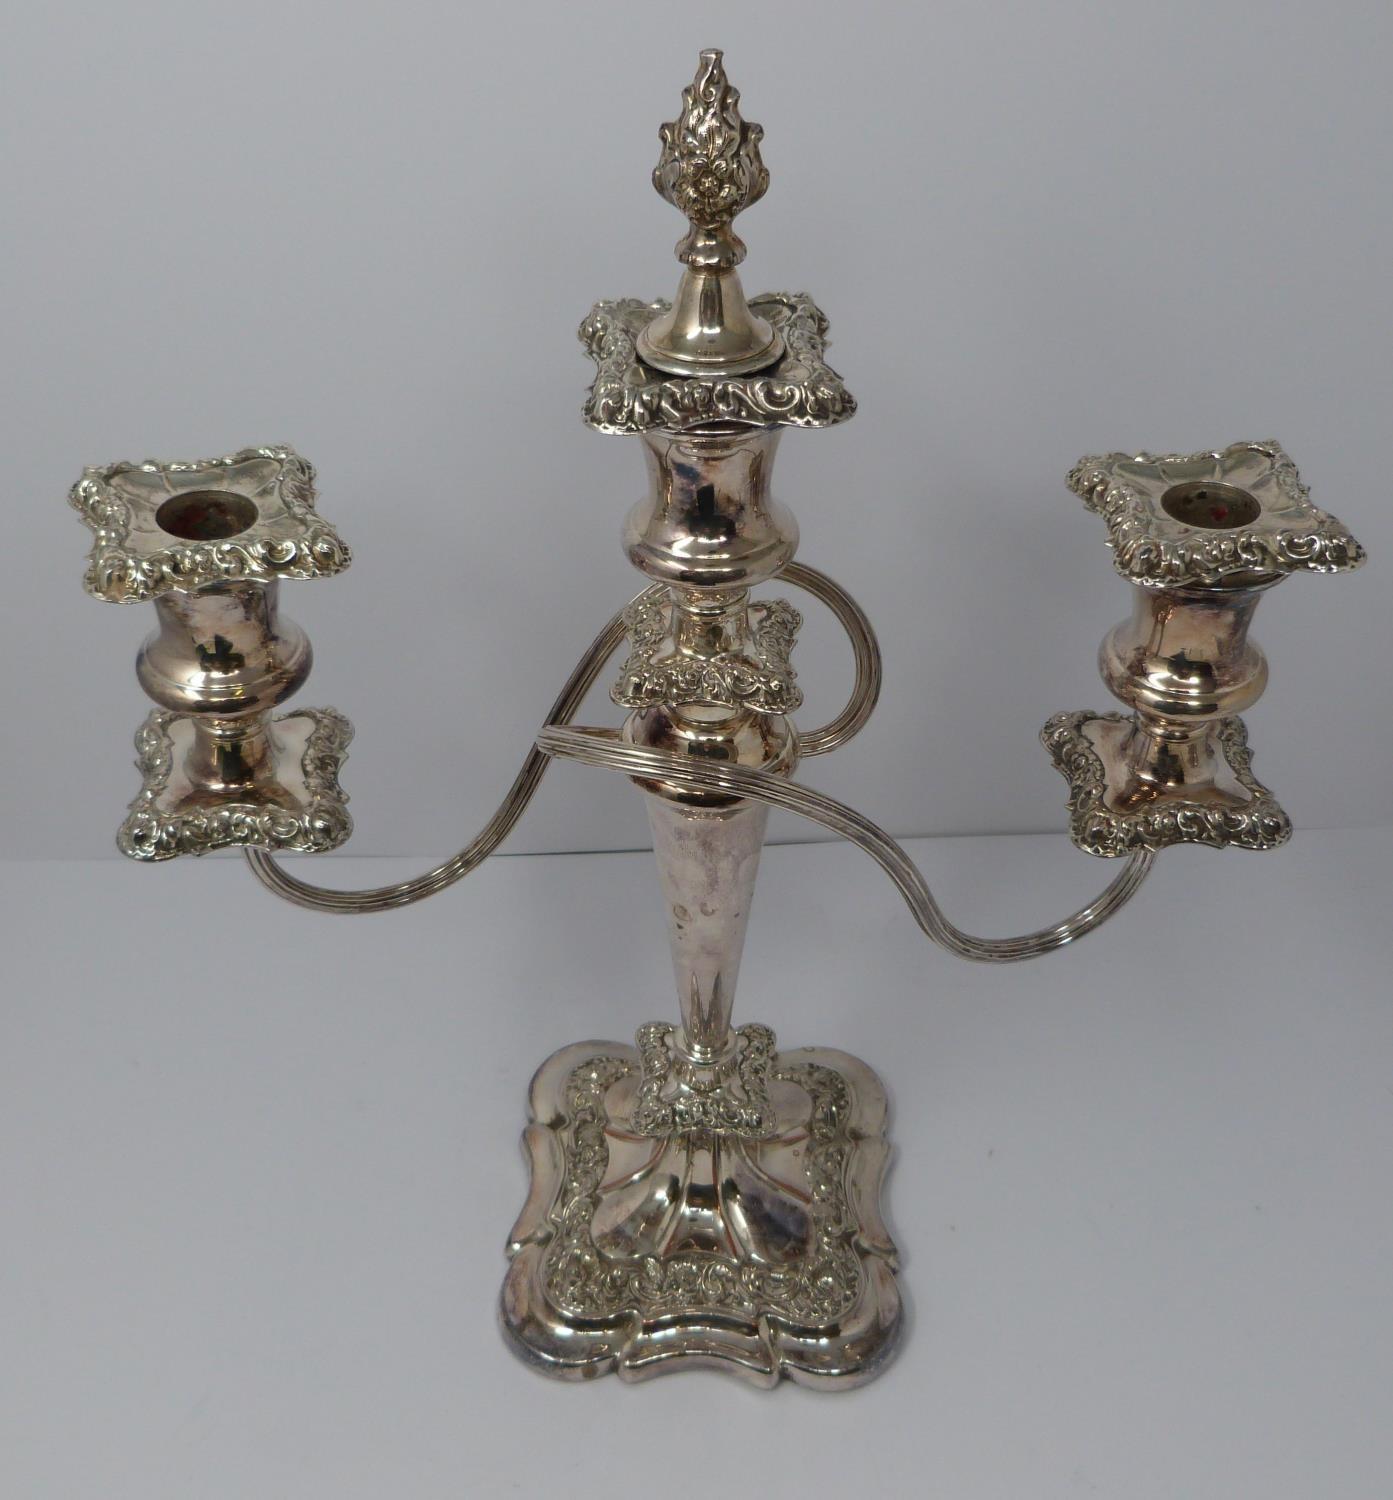 A pair of silver plated candelabra. Repoussé work, elegant swirled design, flame removable finial - Image 3 of 9